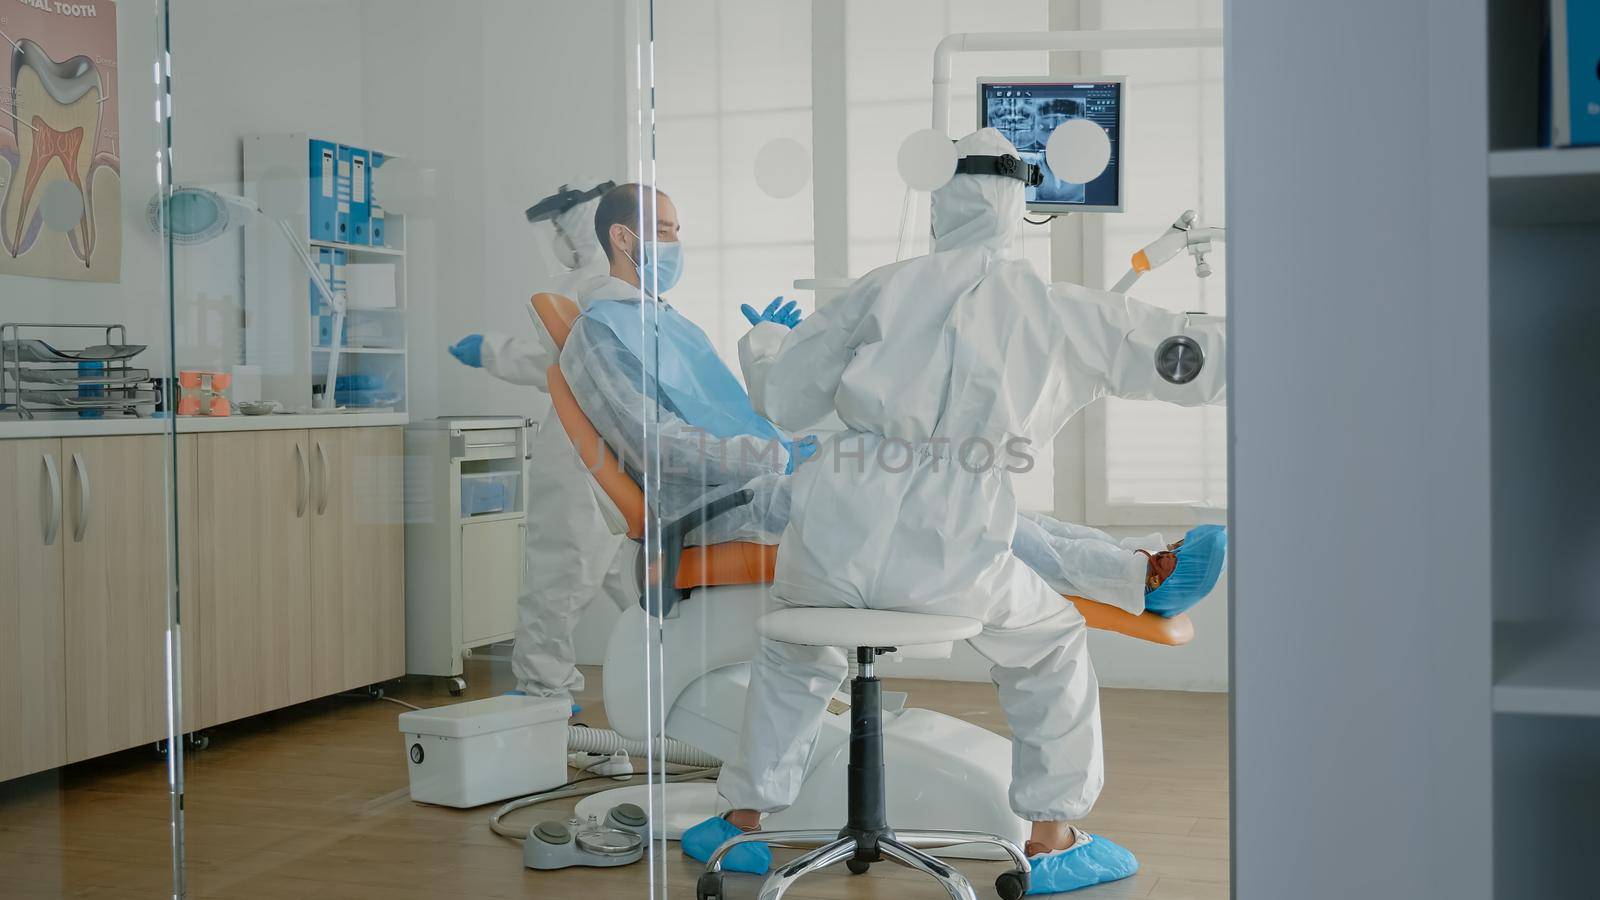 Orthodontists and patient wearing ppe suits in oral cabinet for teeth examination during pandemic. Dentist and assistant using dental equipment and tools for professional consultation